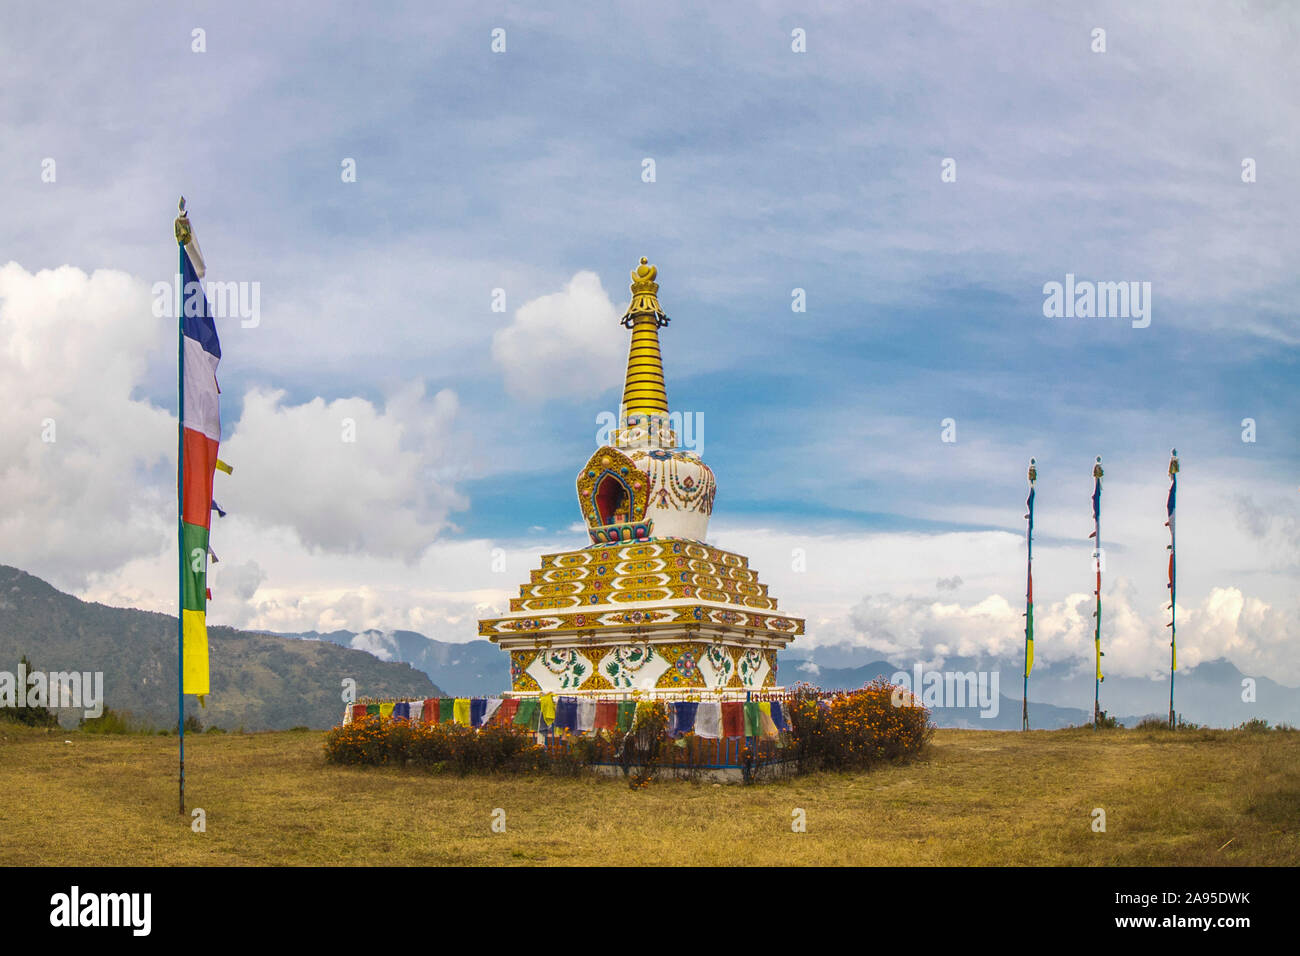 A stupa in a remote part of the countryside along the Helambu Langtang Trek in Nepal Stock Photo